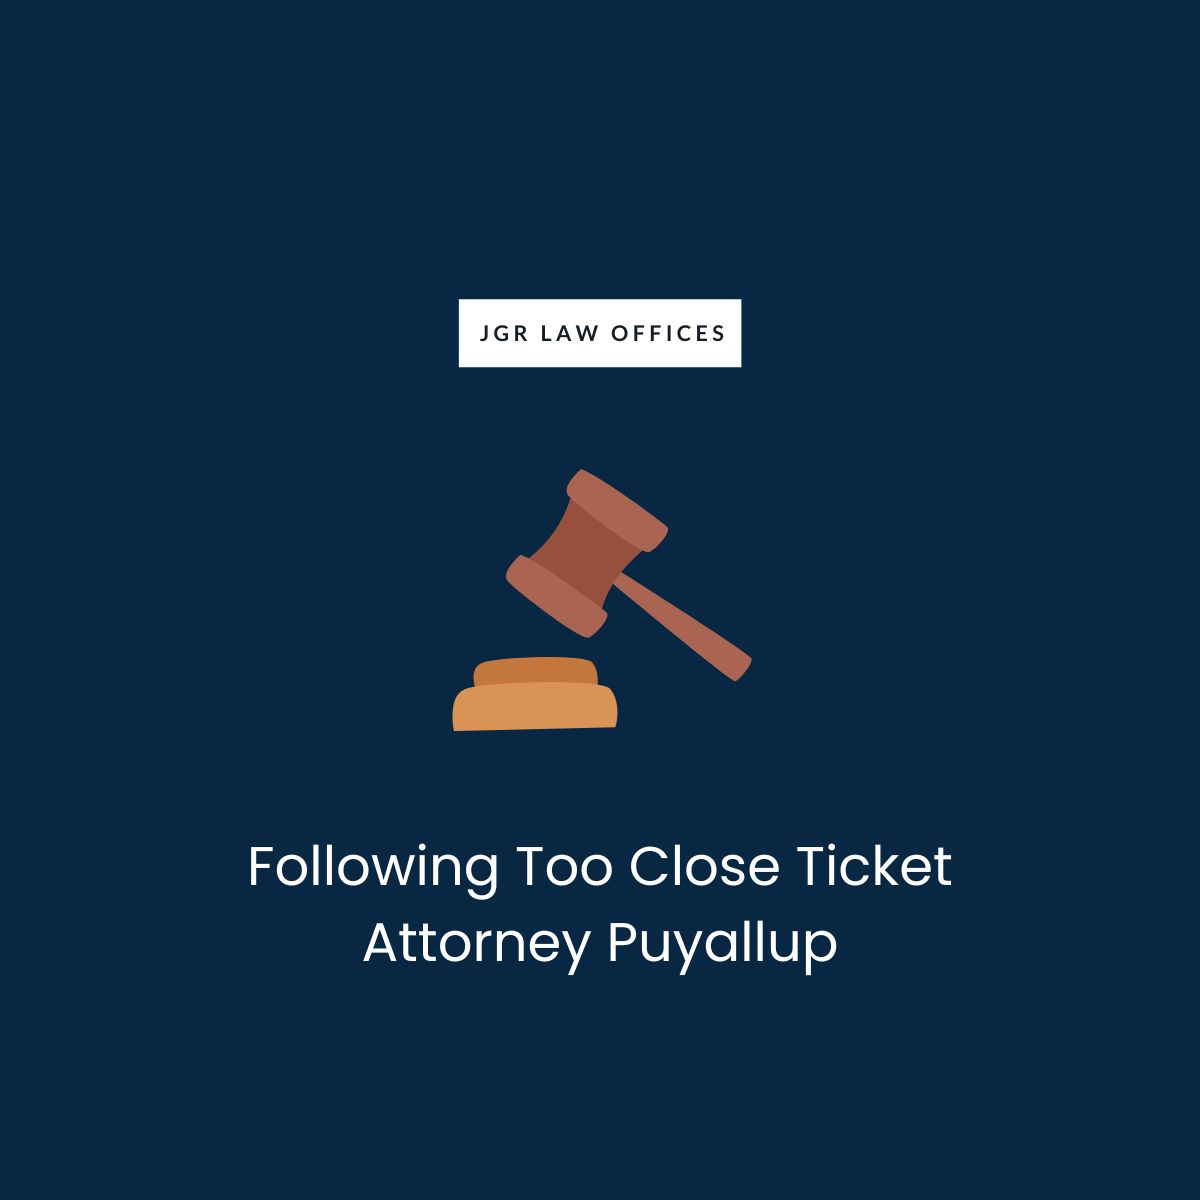 Following Too Close Ticket Attorney Puyallup